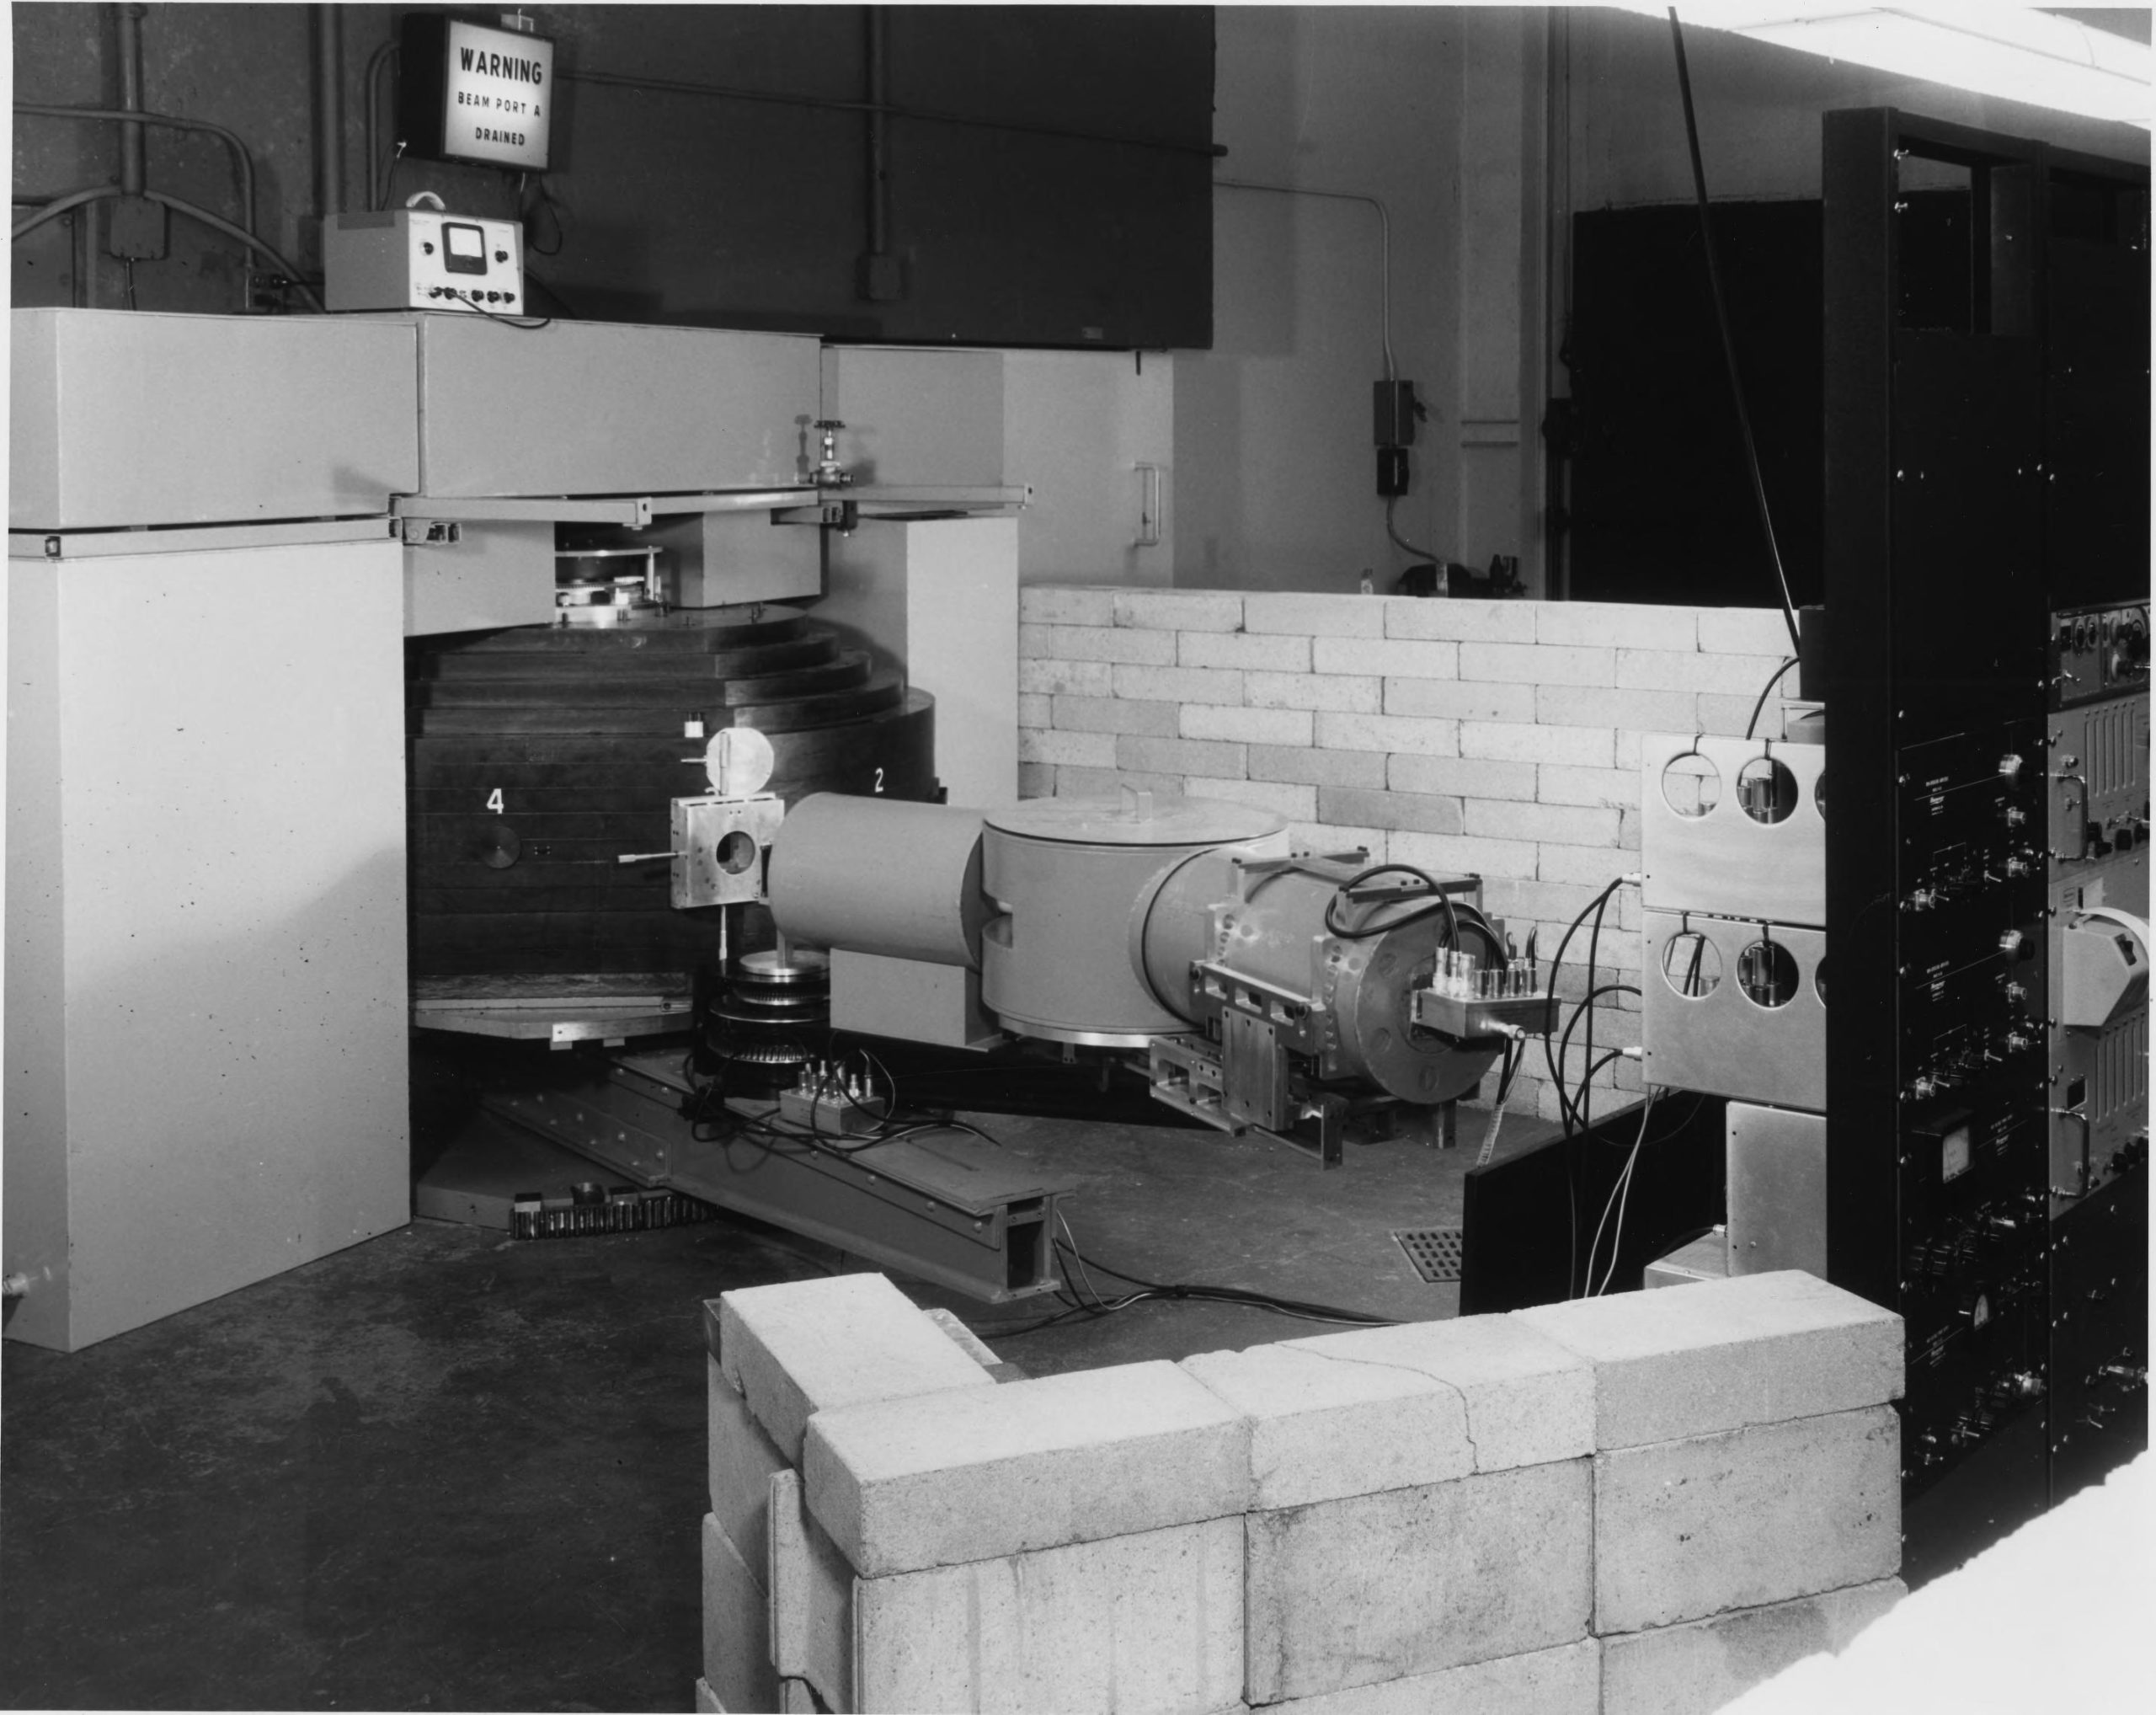 Particle beam equipment at base of Ford Nuclear reactor